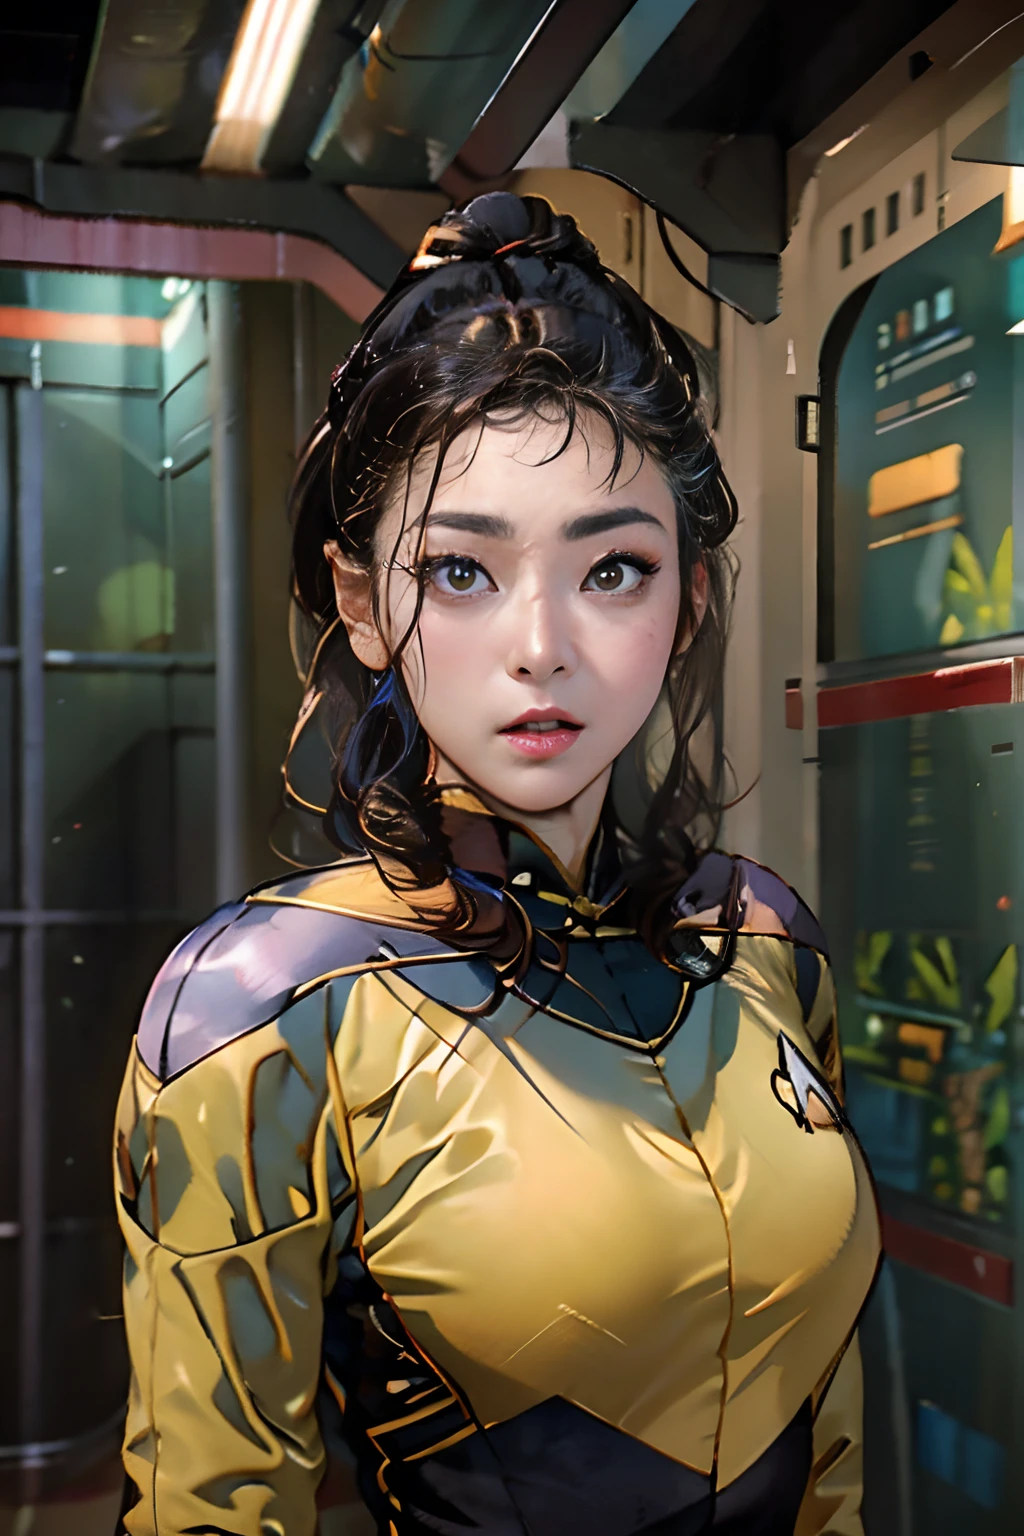 (masterpiece), best quality, expressive eyes, perfect face, Ensign Kim's sister is a beautiful Asian girl, perfect eyes, perfect hands, yellow and black Star Trek Voyager uniform, tight uniform, photo-realistic, Harry Kim's Sister, ensign Harry Kim's sexy Sister, bright indoor